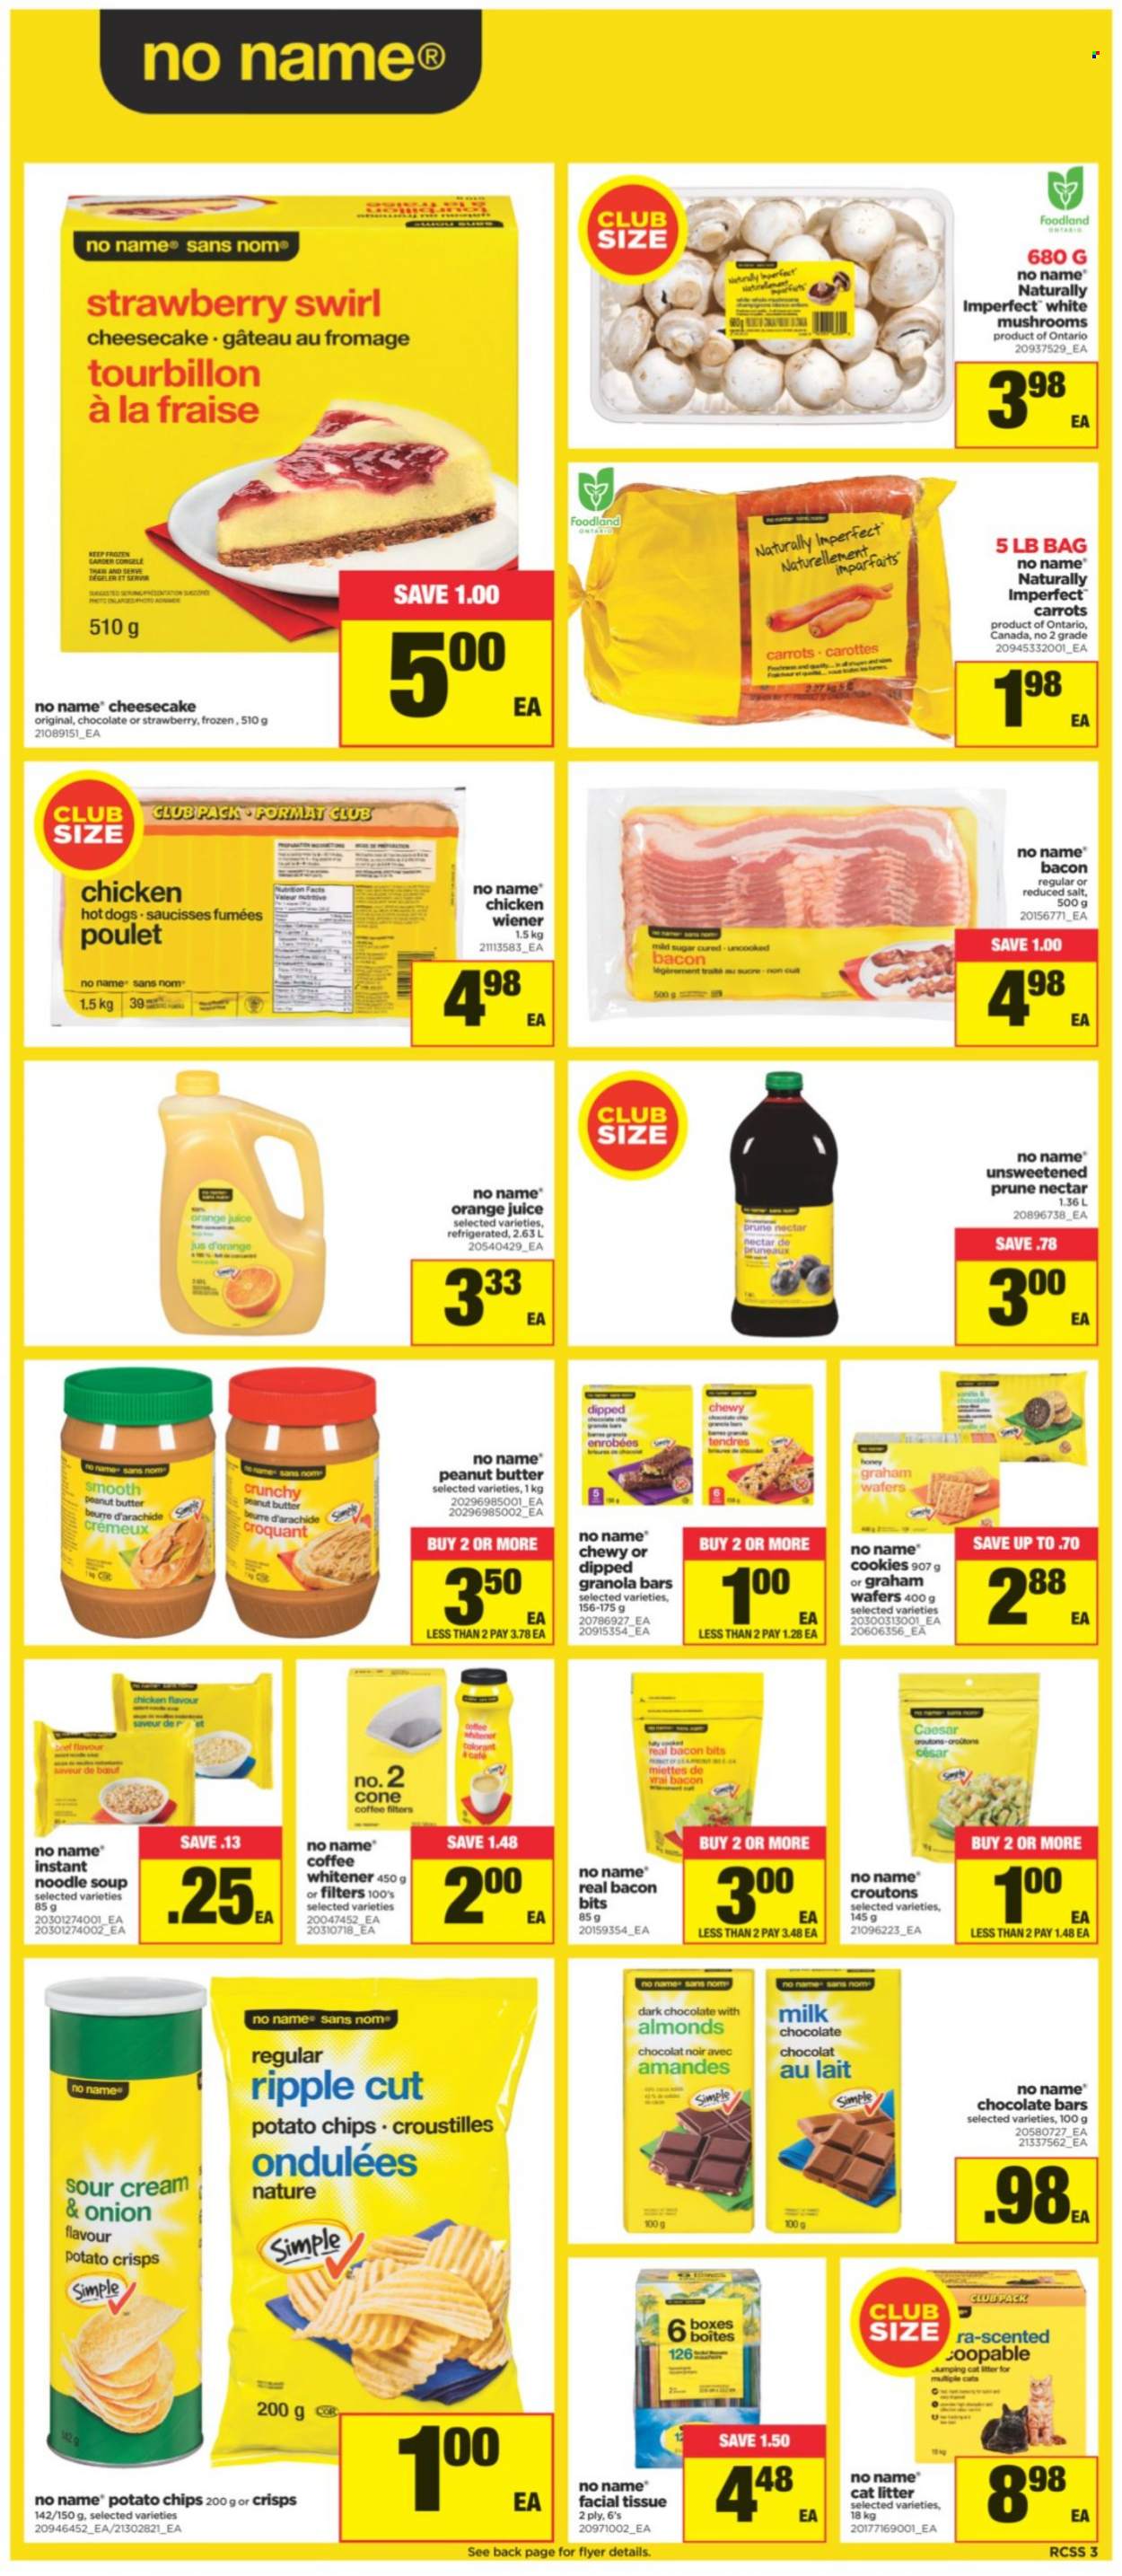 thumbnail - Real Canadian Superstore Flyer - October 14, 2021 - October 20, 2021 - Sales products - mushrooms, cheesecake, carrots, No Name, hot dog, soup, noodles cup, noodles, bacon bits, cookies, milk chocolate, wafers, toffee, dark chocolate, chocolate bar, potato crisps, potato chips, croutons, sugar, granola bar, honey, orange juice, juice, tissues, cat litter. Page 3.